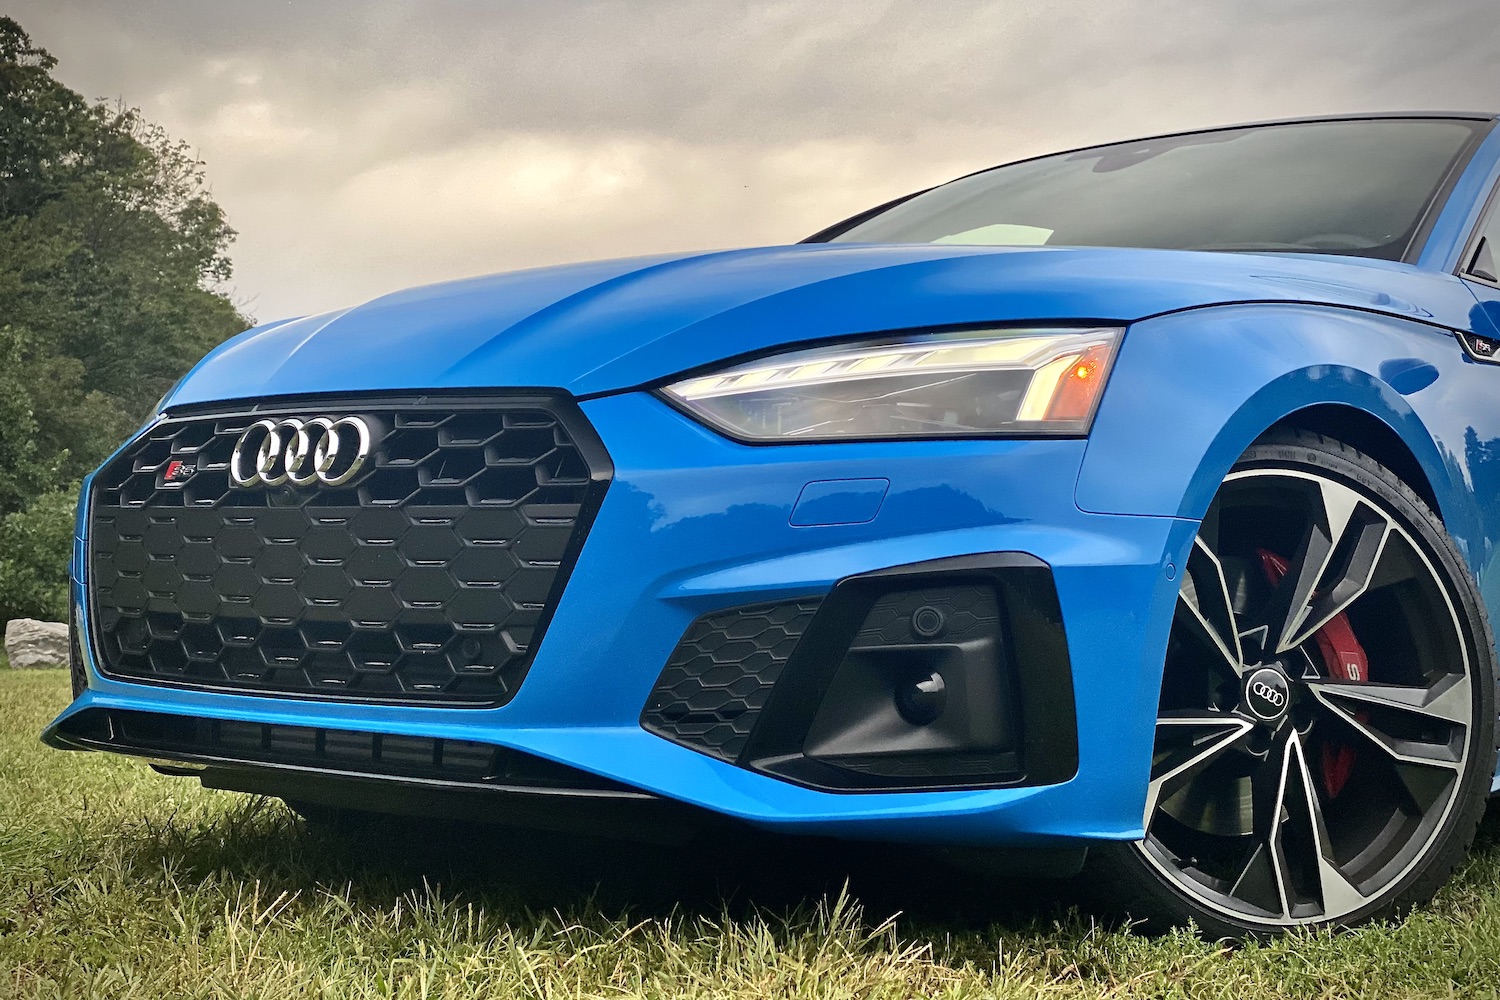 Close up of front end of 2023 Audi S5 Sportback during a sunset in a grassy field.